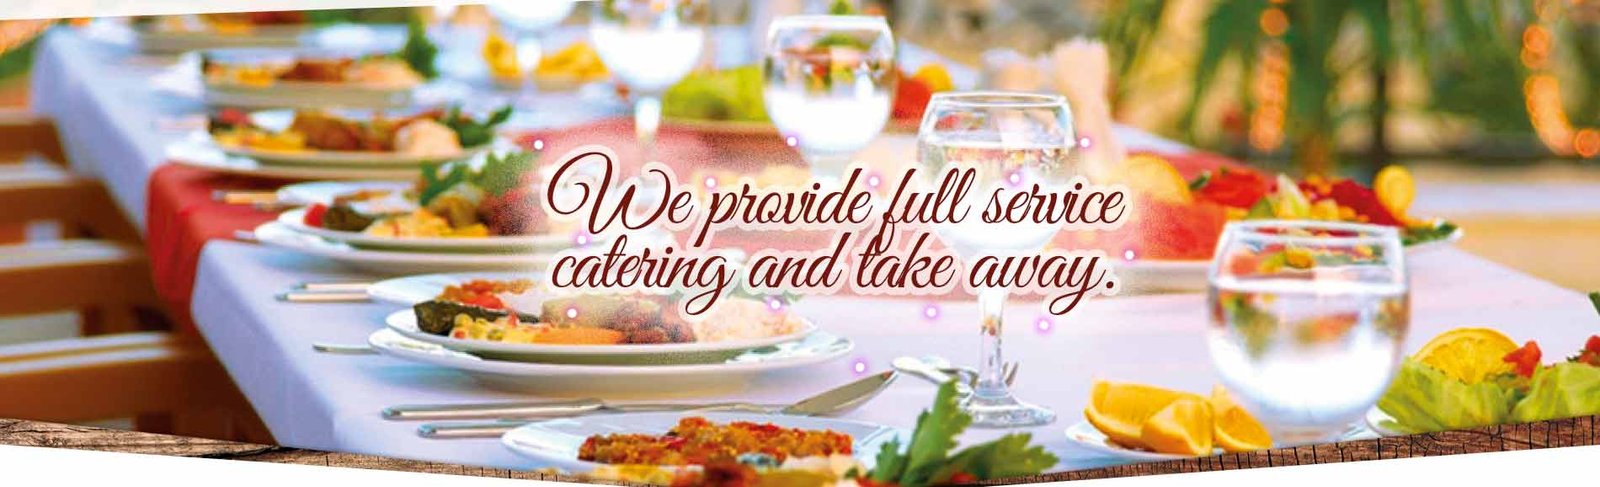 Catering and Restaurant Services in Plymouth, NE